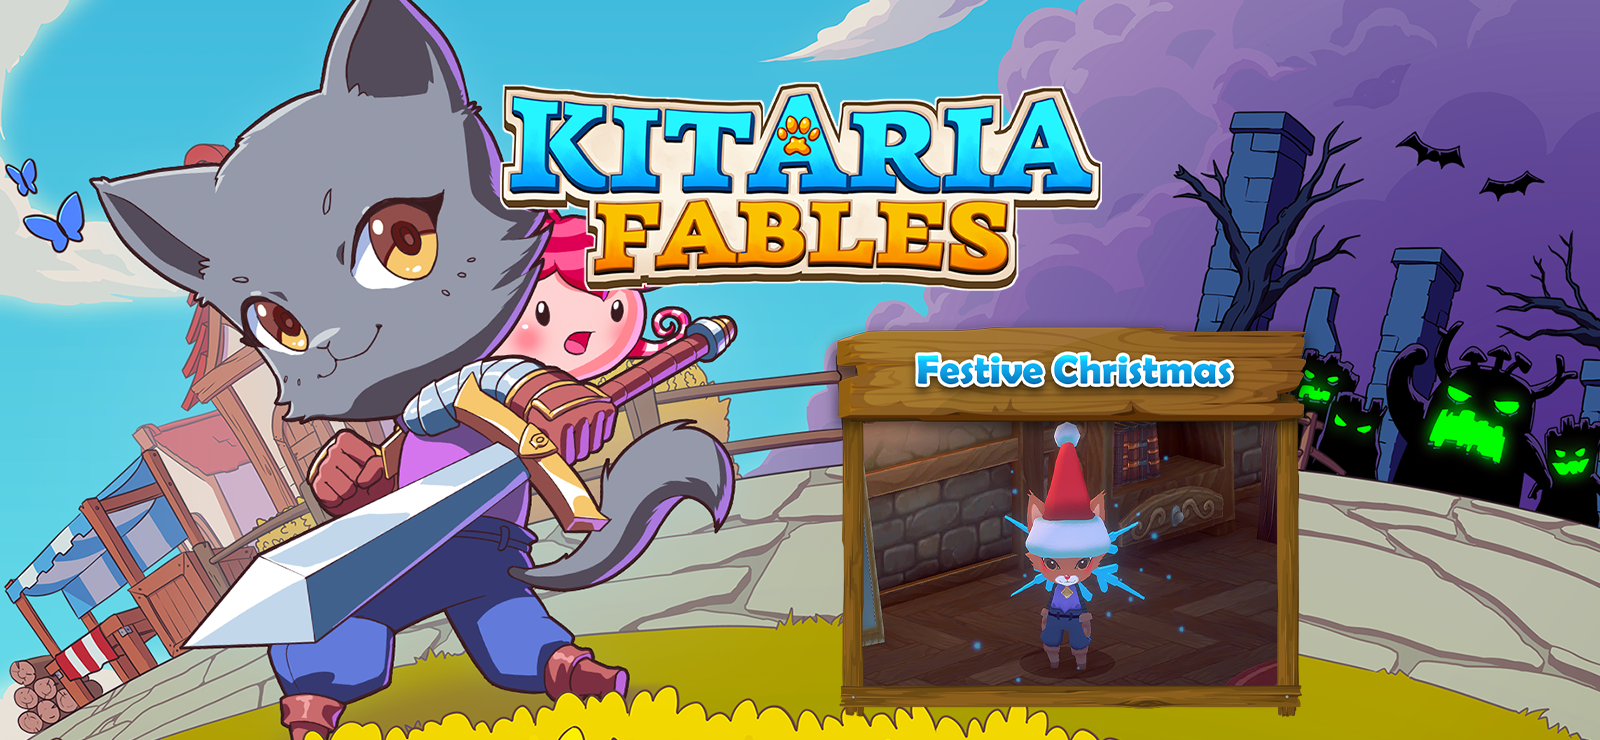 Kitaria Fables - Festive Christmas Outfit